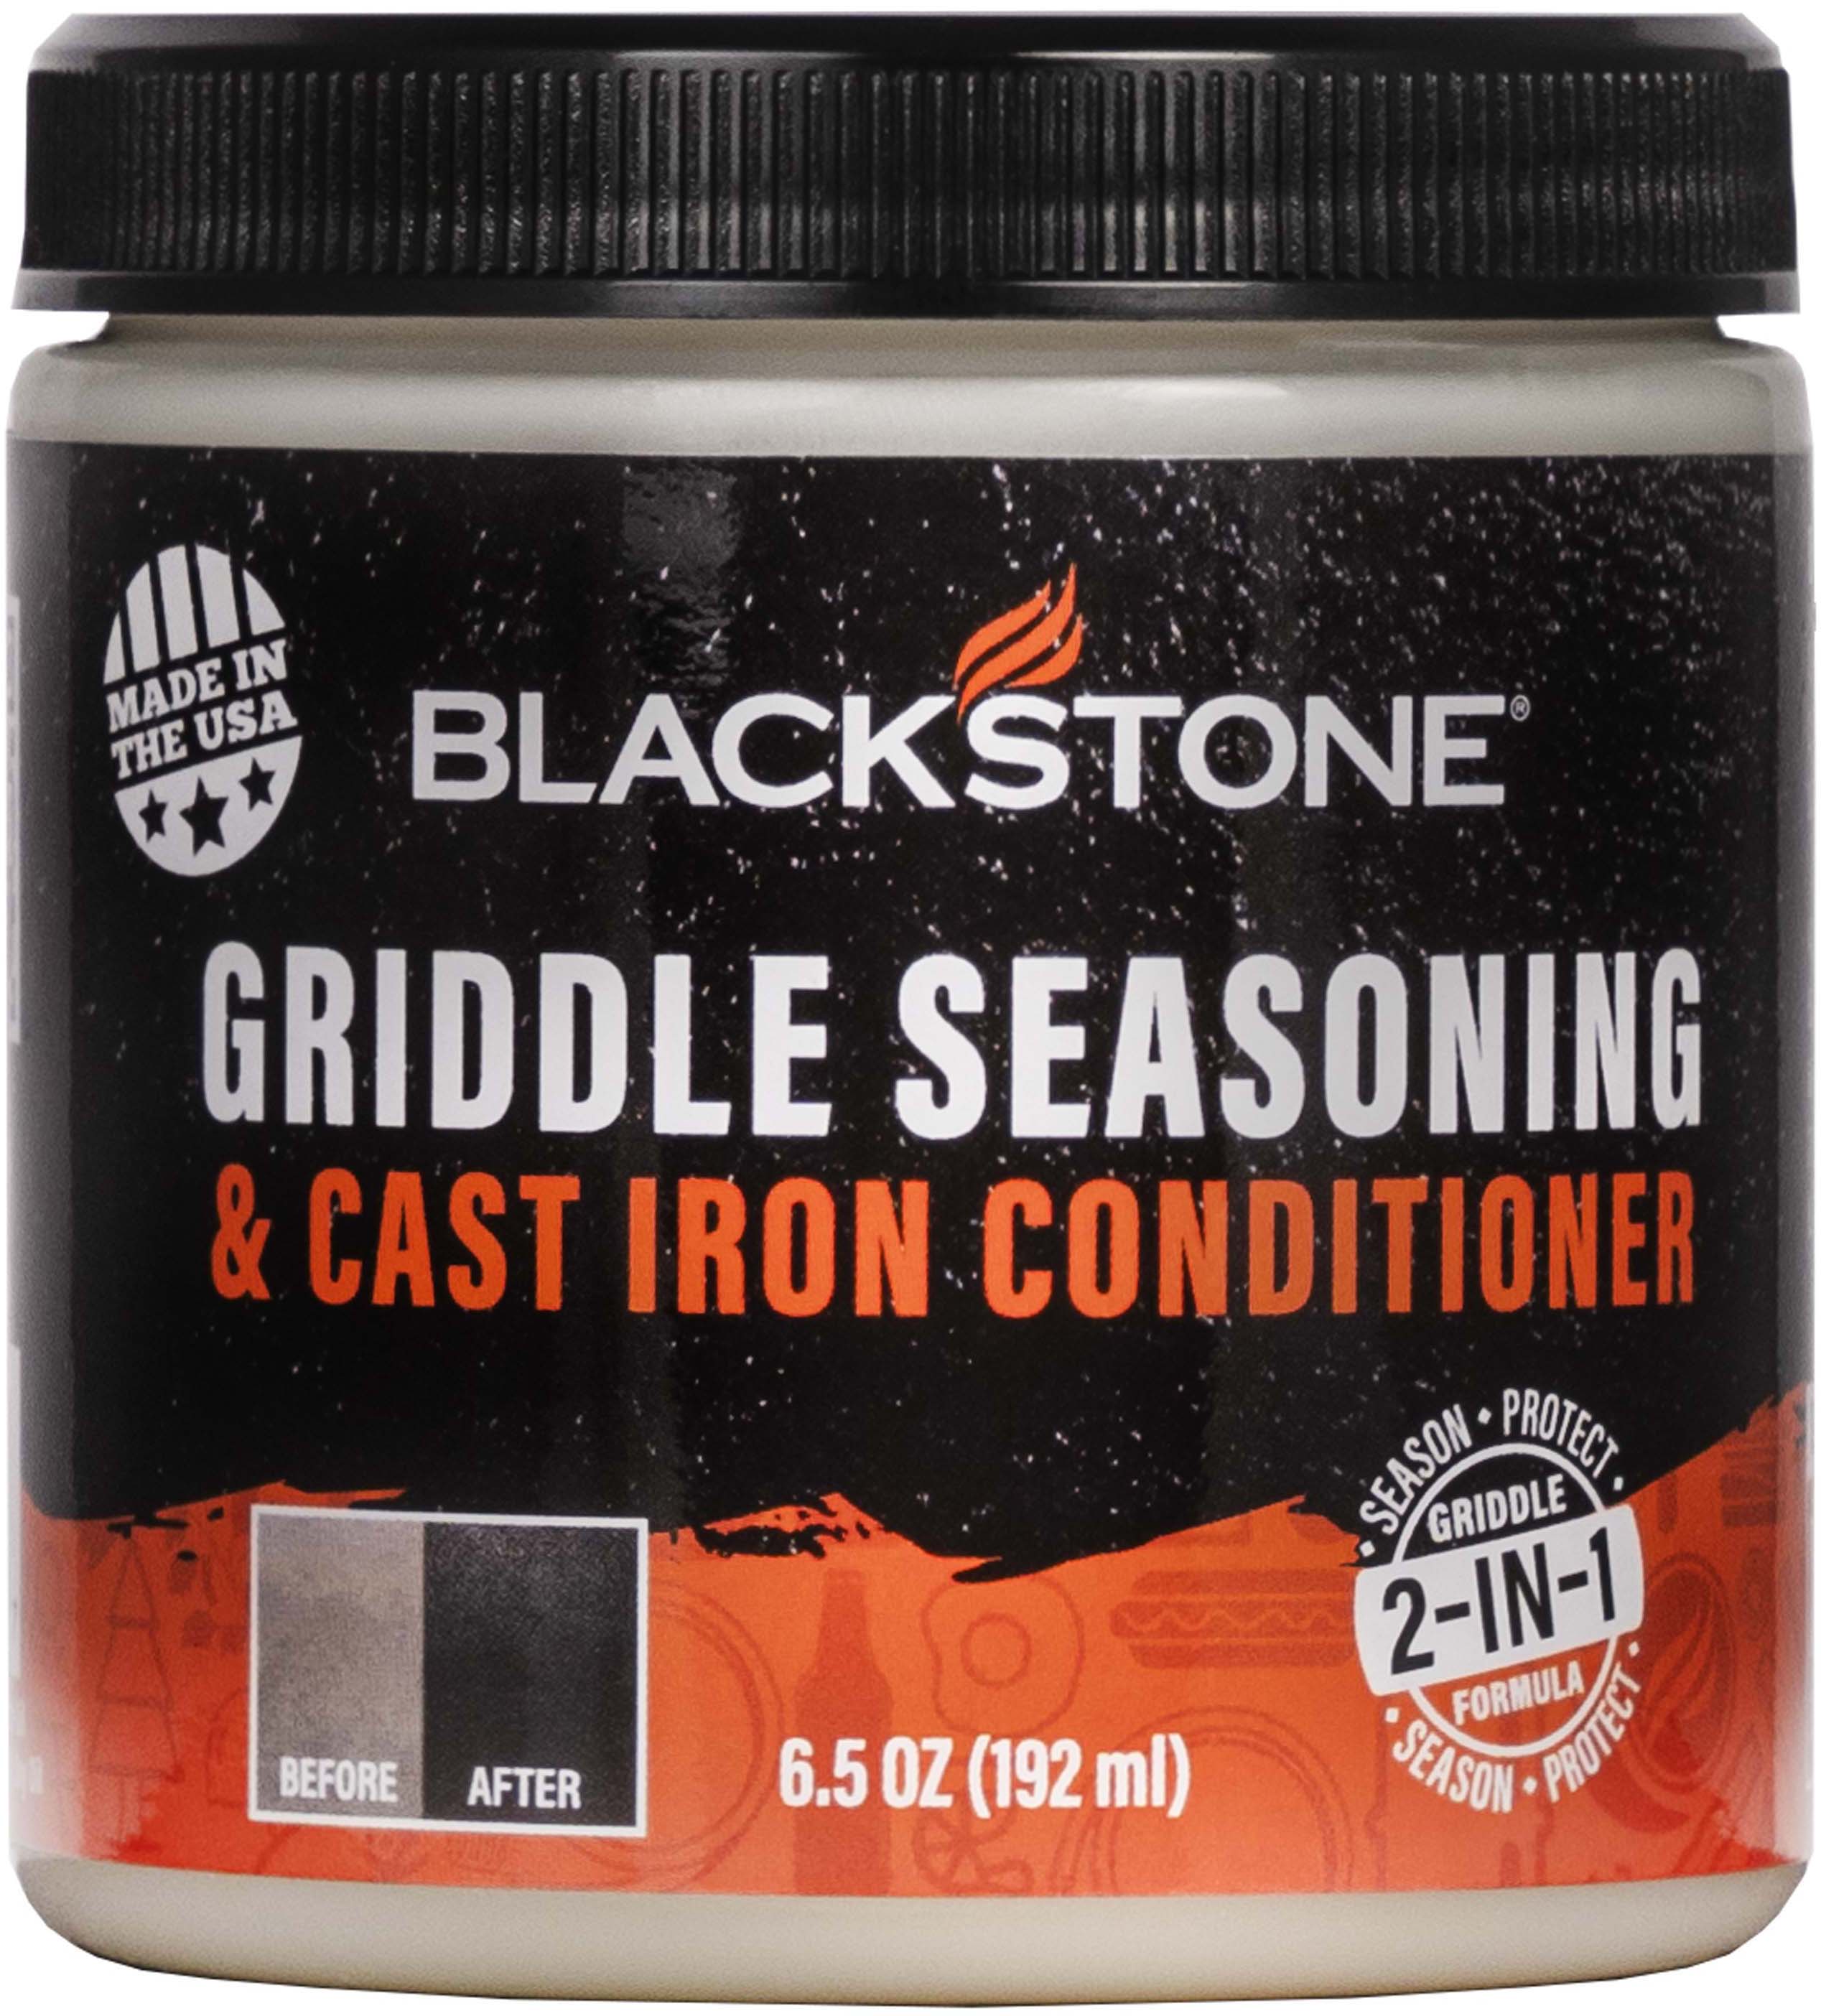 Blackstone Griddle Seasoning and Cast Iron Conditioner - 2 Pack